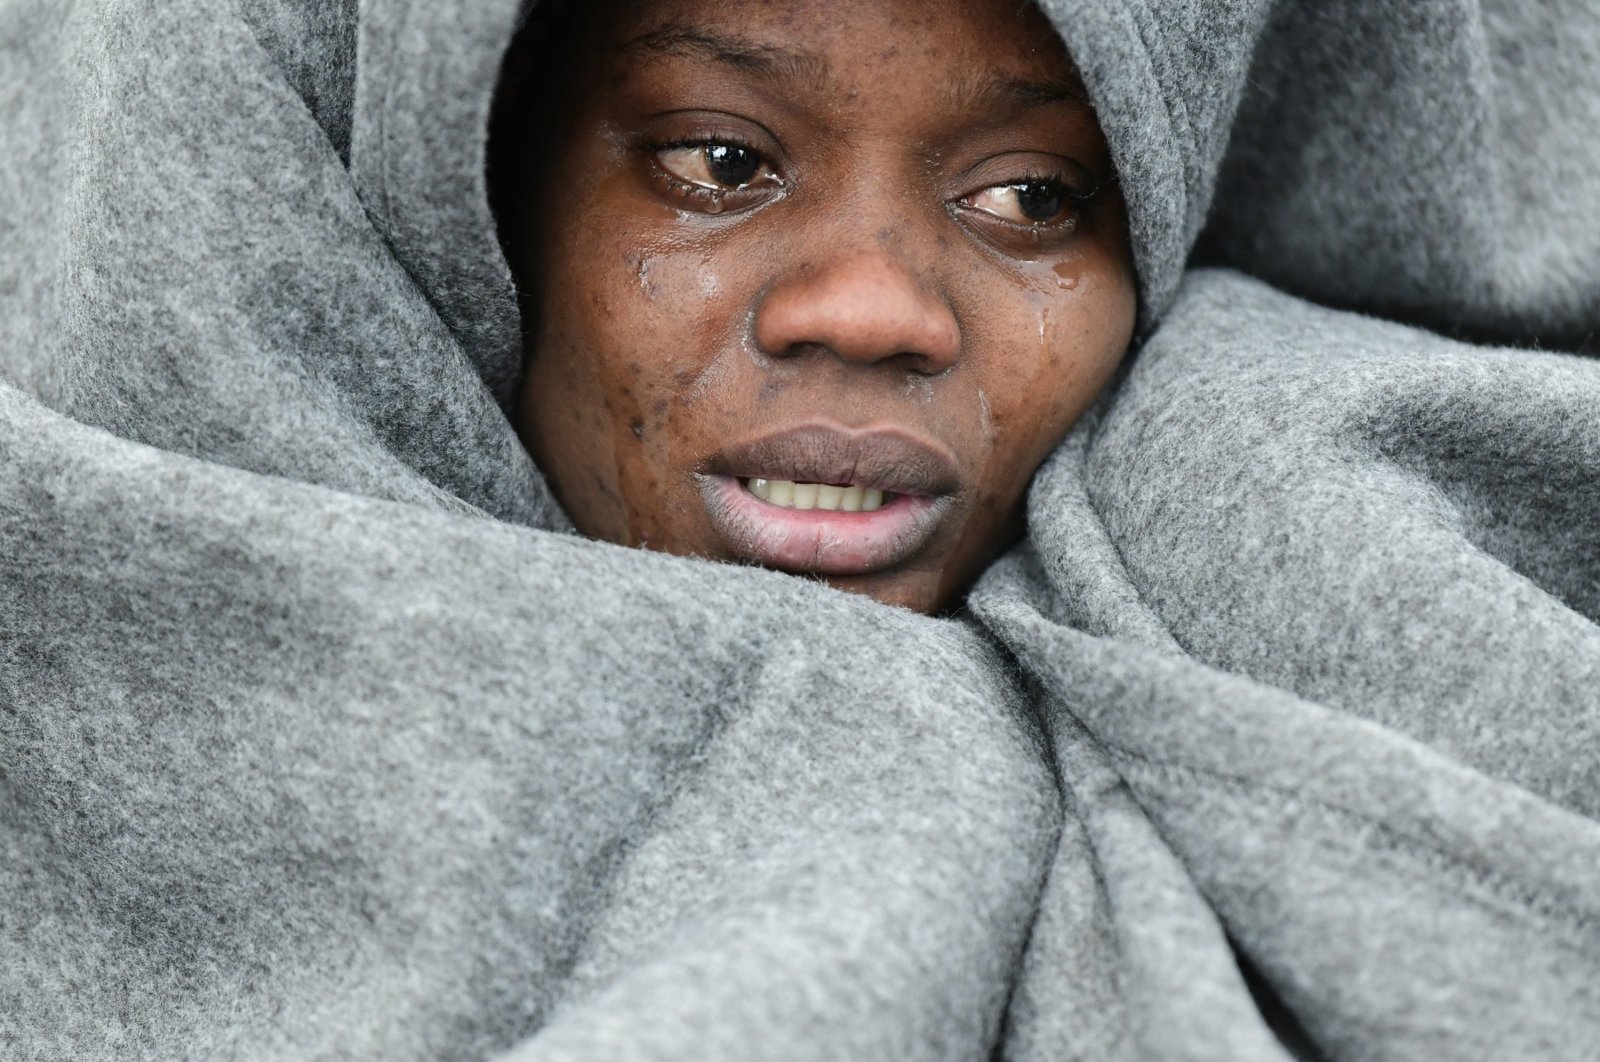 A migrant cries as she tries to warm herself as she and others arrive at the village of Skala Sikaminias, on the Greek island of Lesbos, after crossing the Aegean Sea, Feb. 29, 2020. (AP Photo)